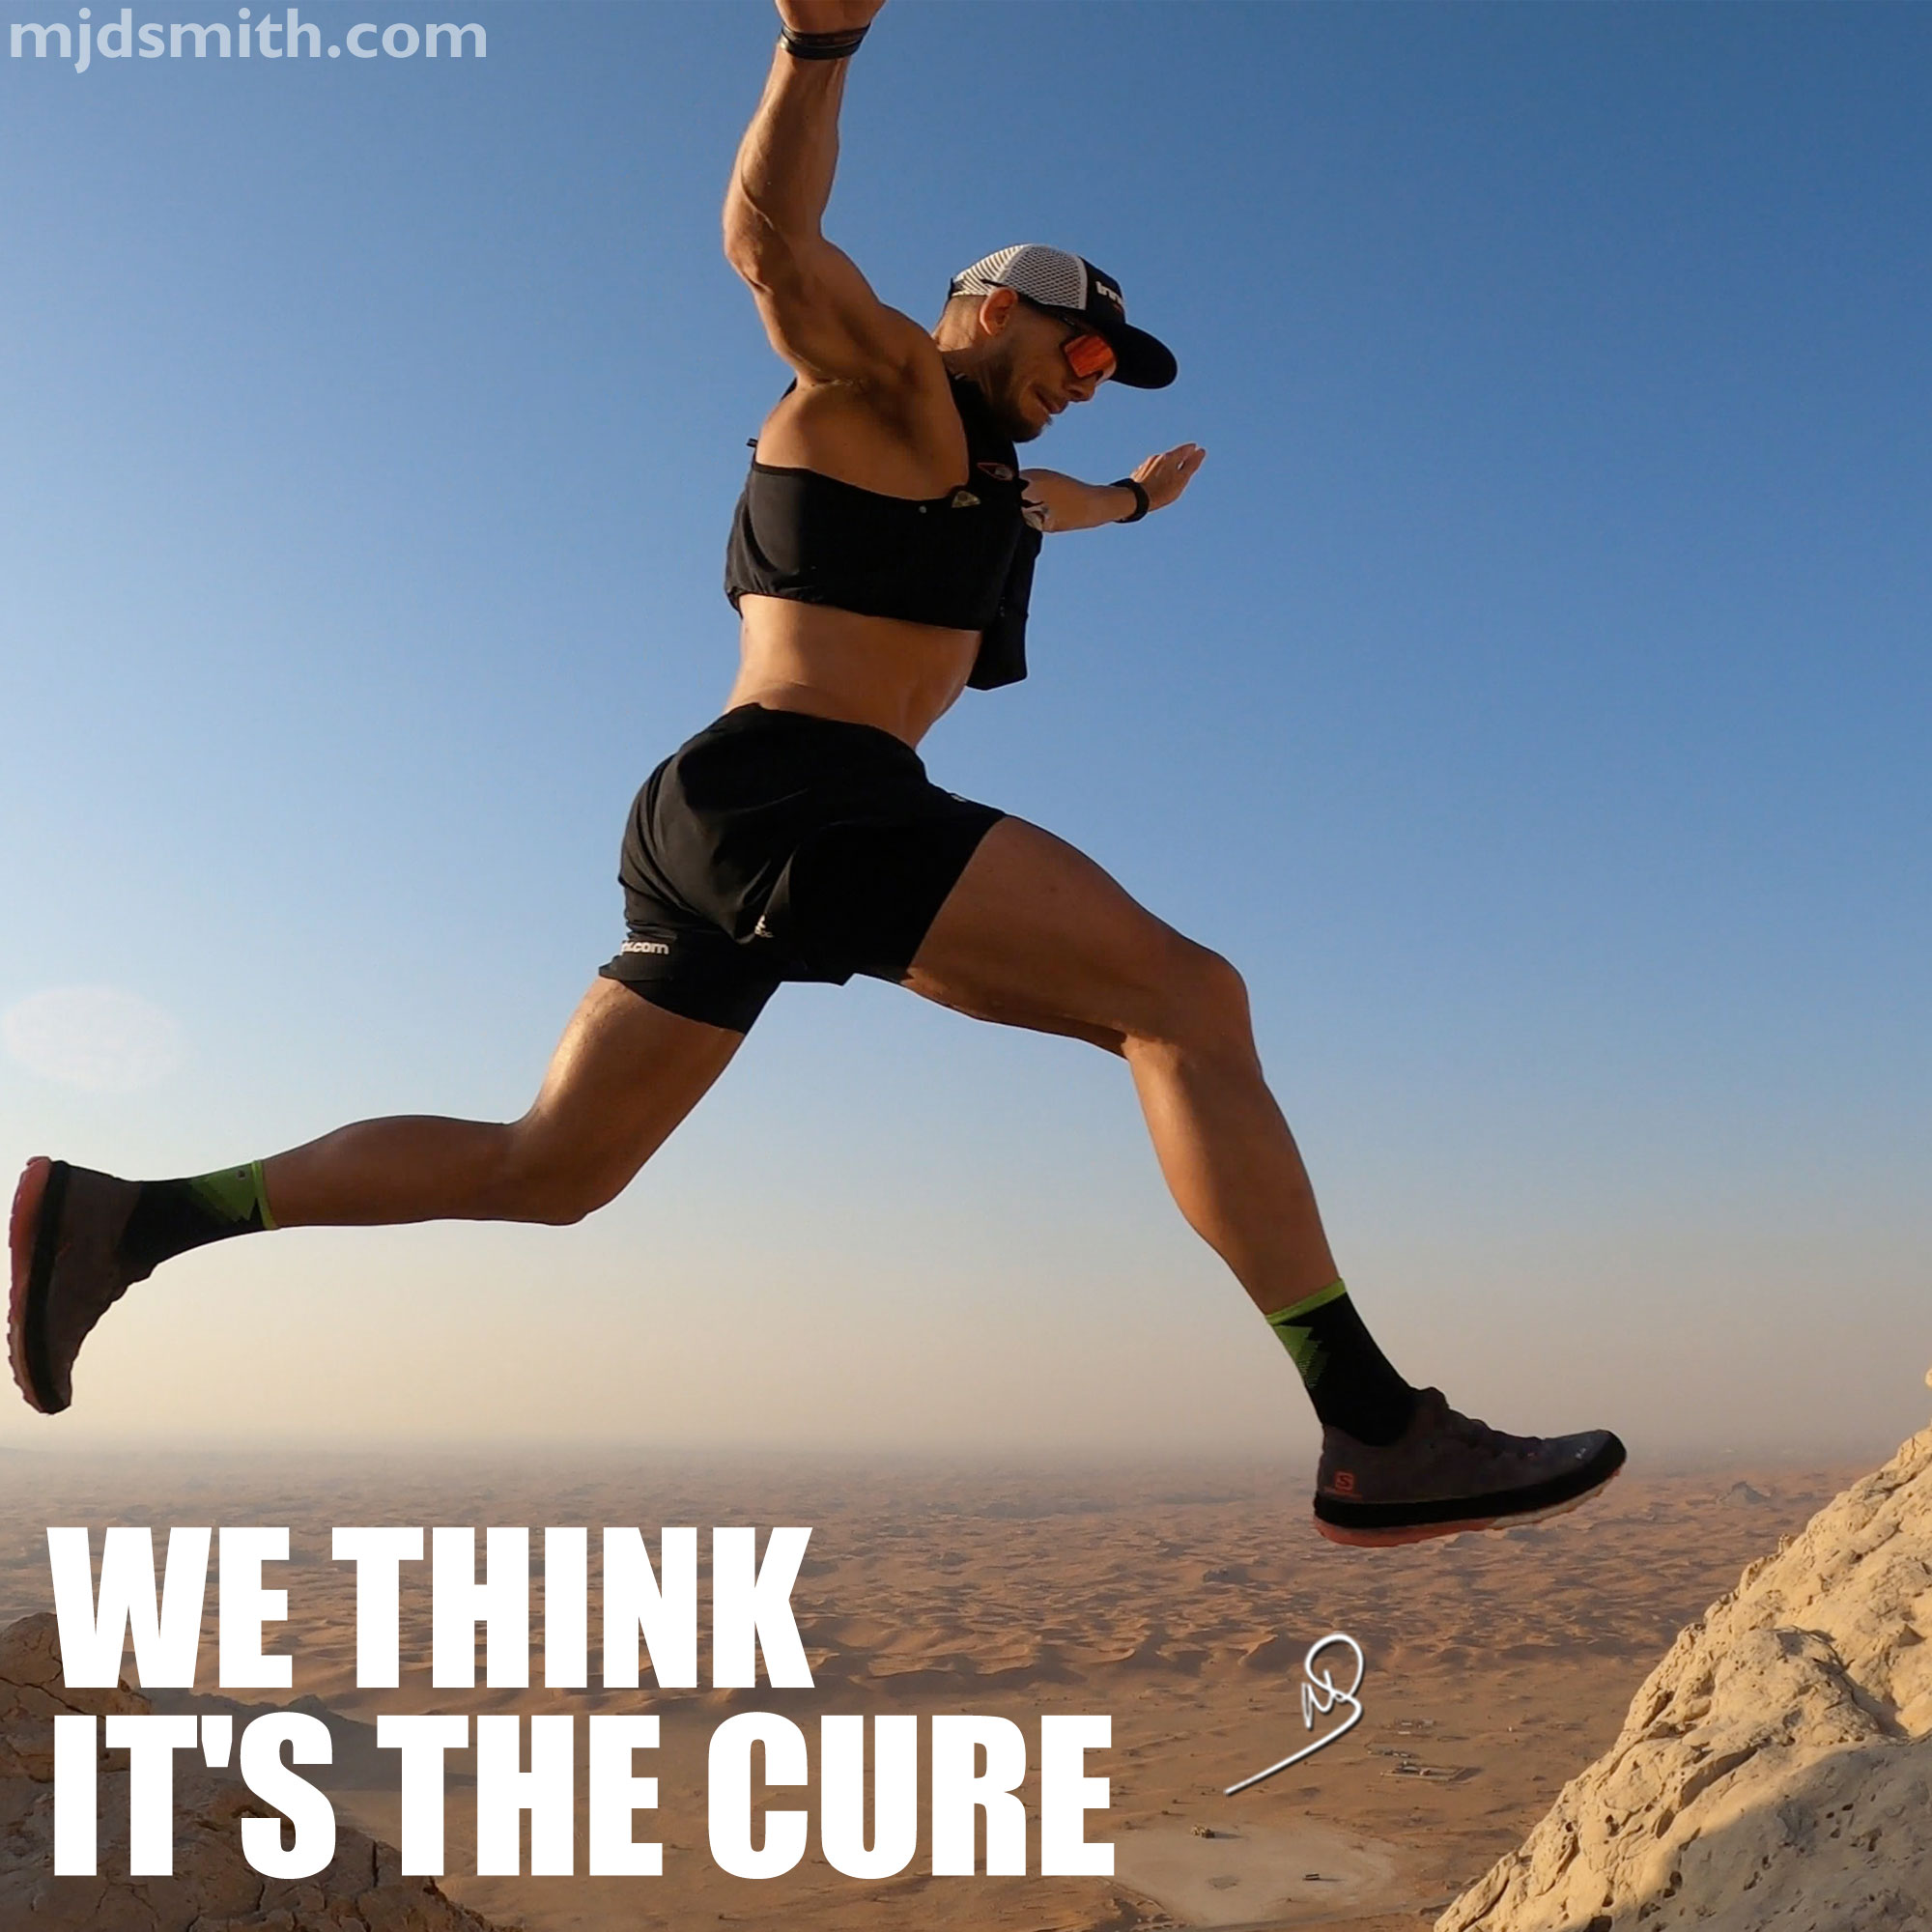 We think it’s the cure